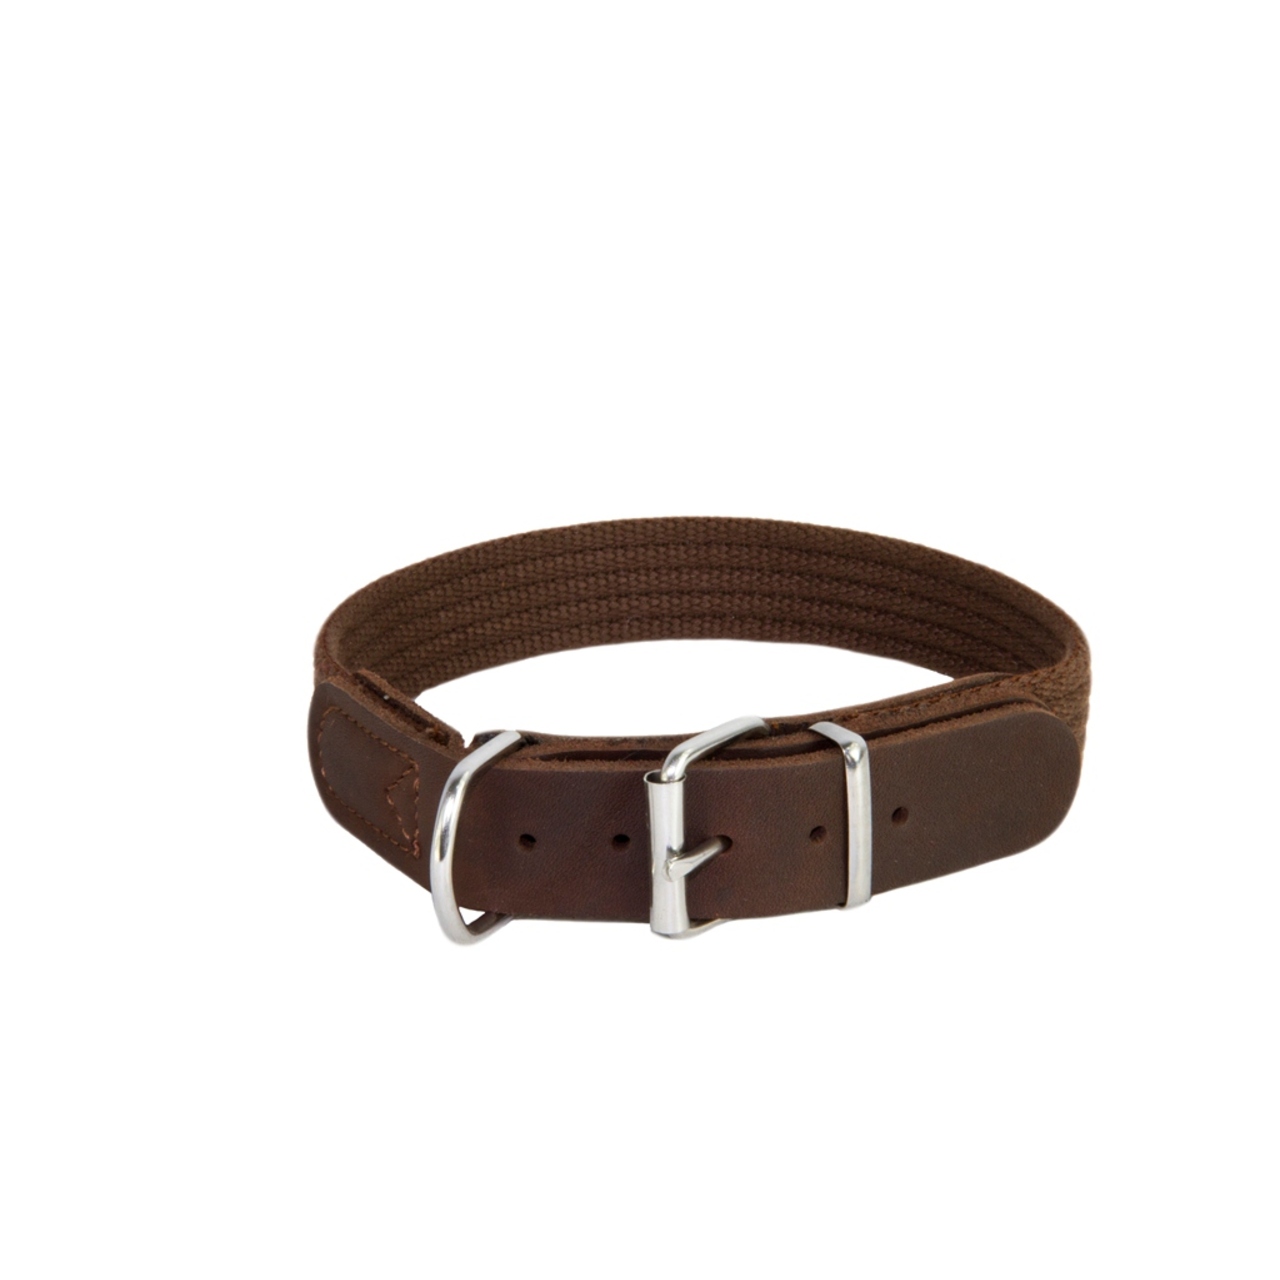 An image of Earthbound Cotton Brown Collar 46 - 52cm